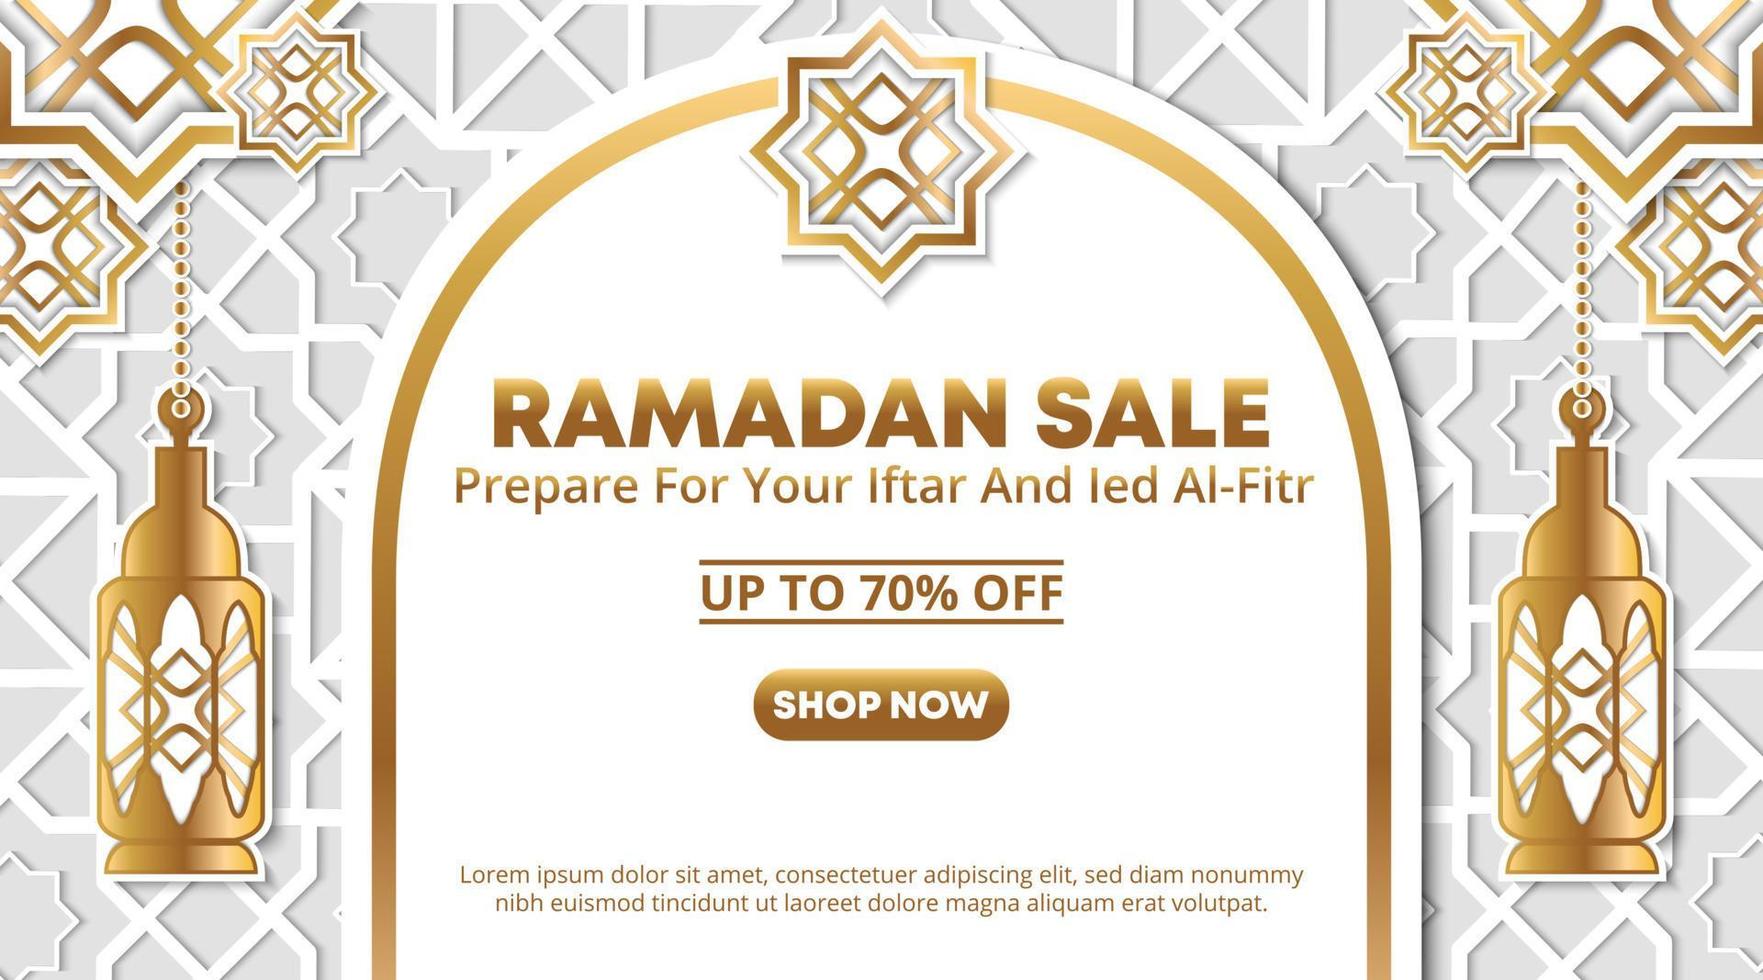 Ramadan sale banner design with cutting paper style of Islamic decoration vector